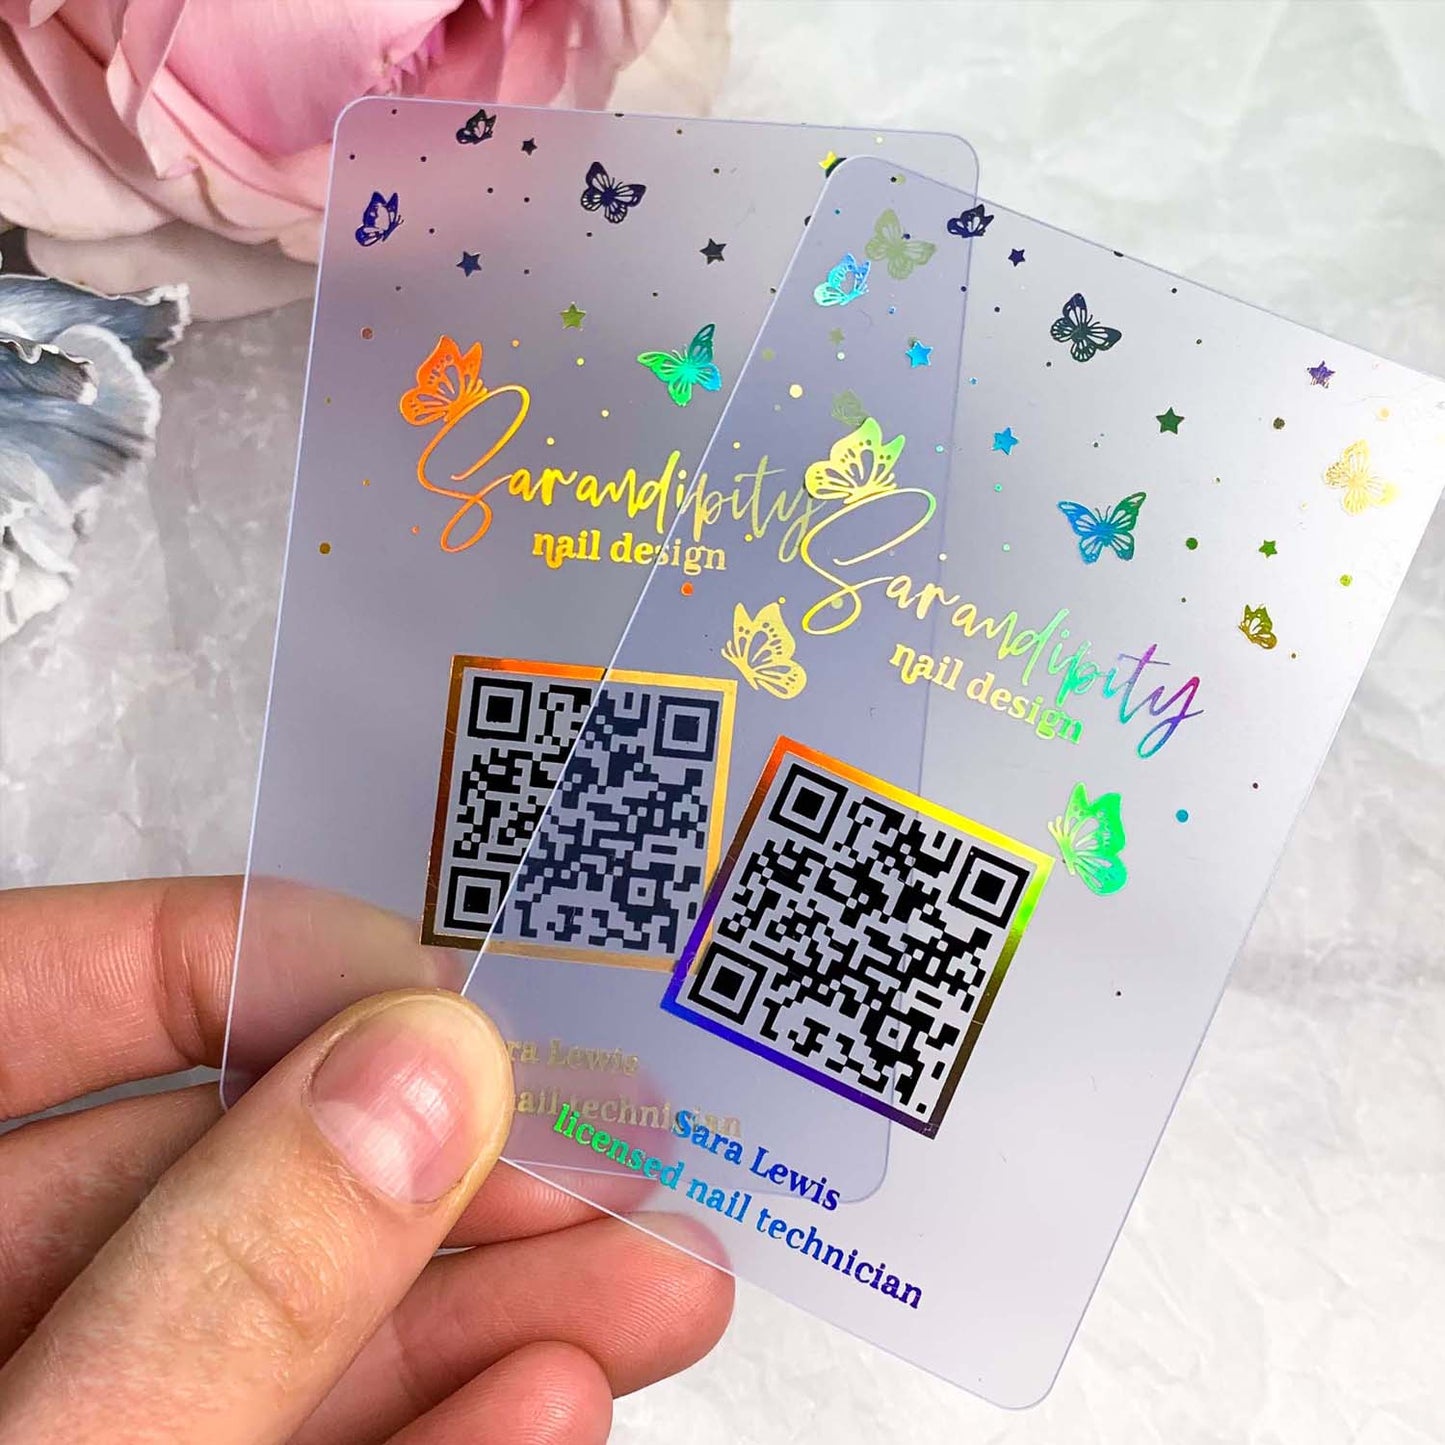 QR code Business Cards, Frosted Plastic Business Cards, hologram business cards, transparen business cards, qr code cards, holographic cards